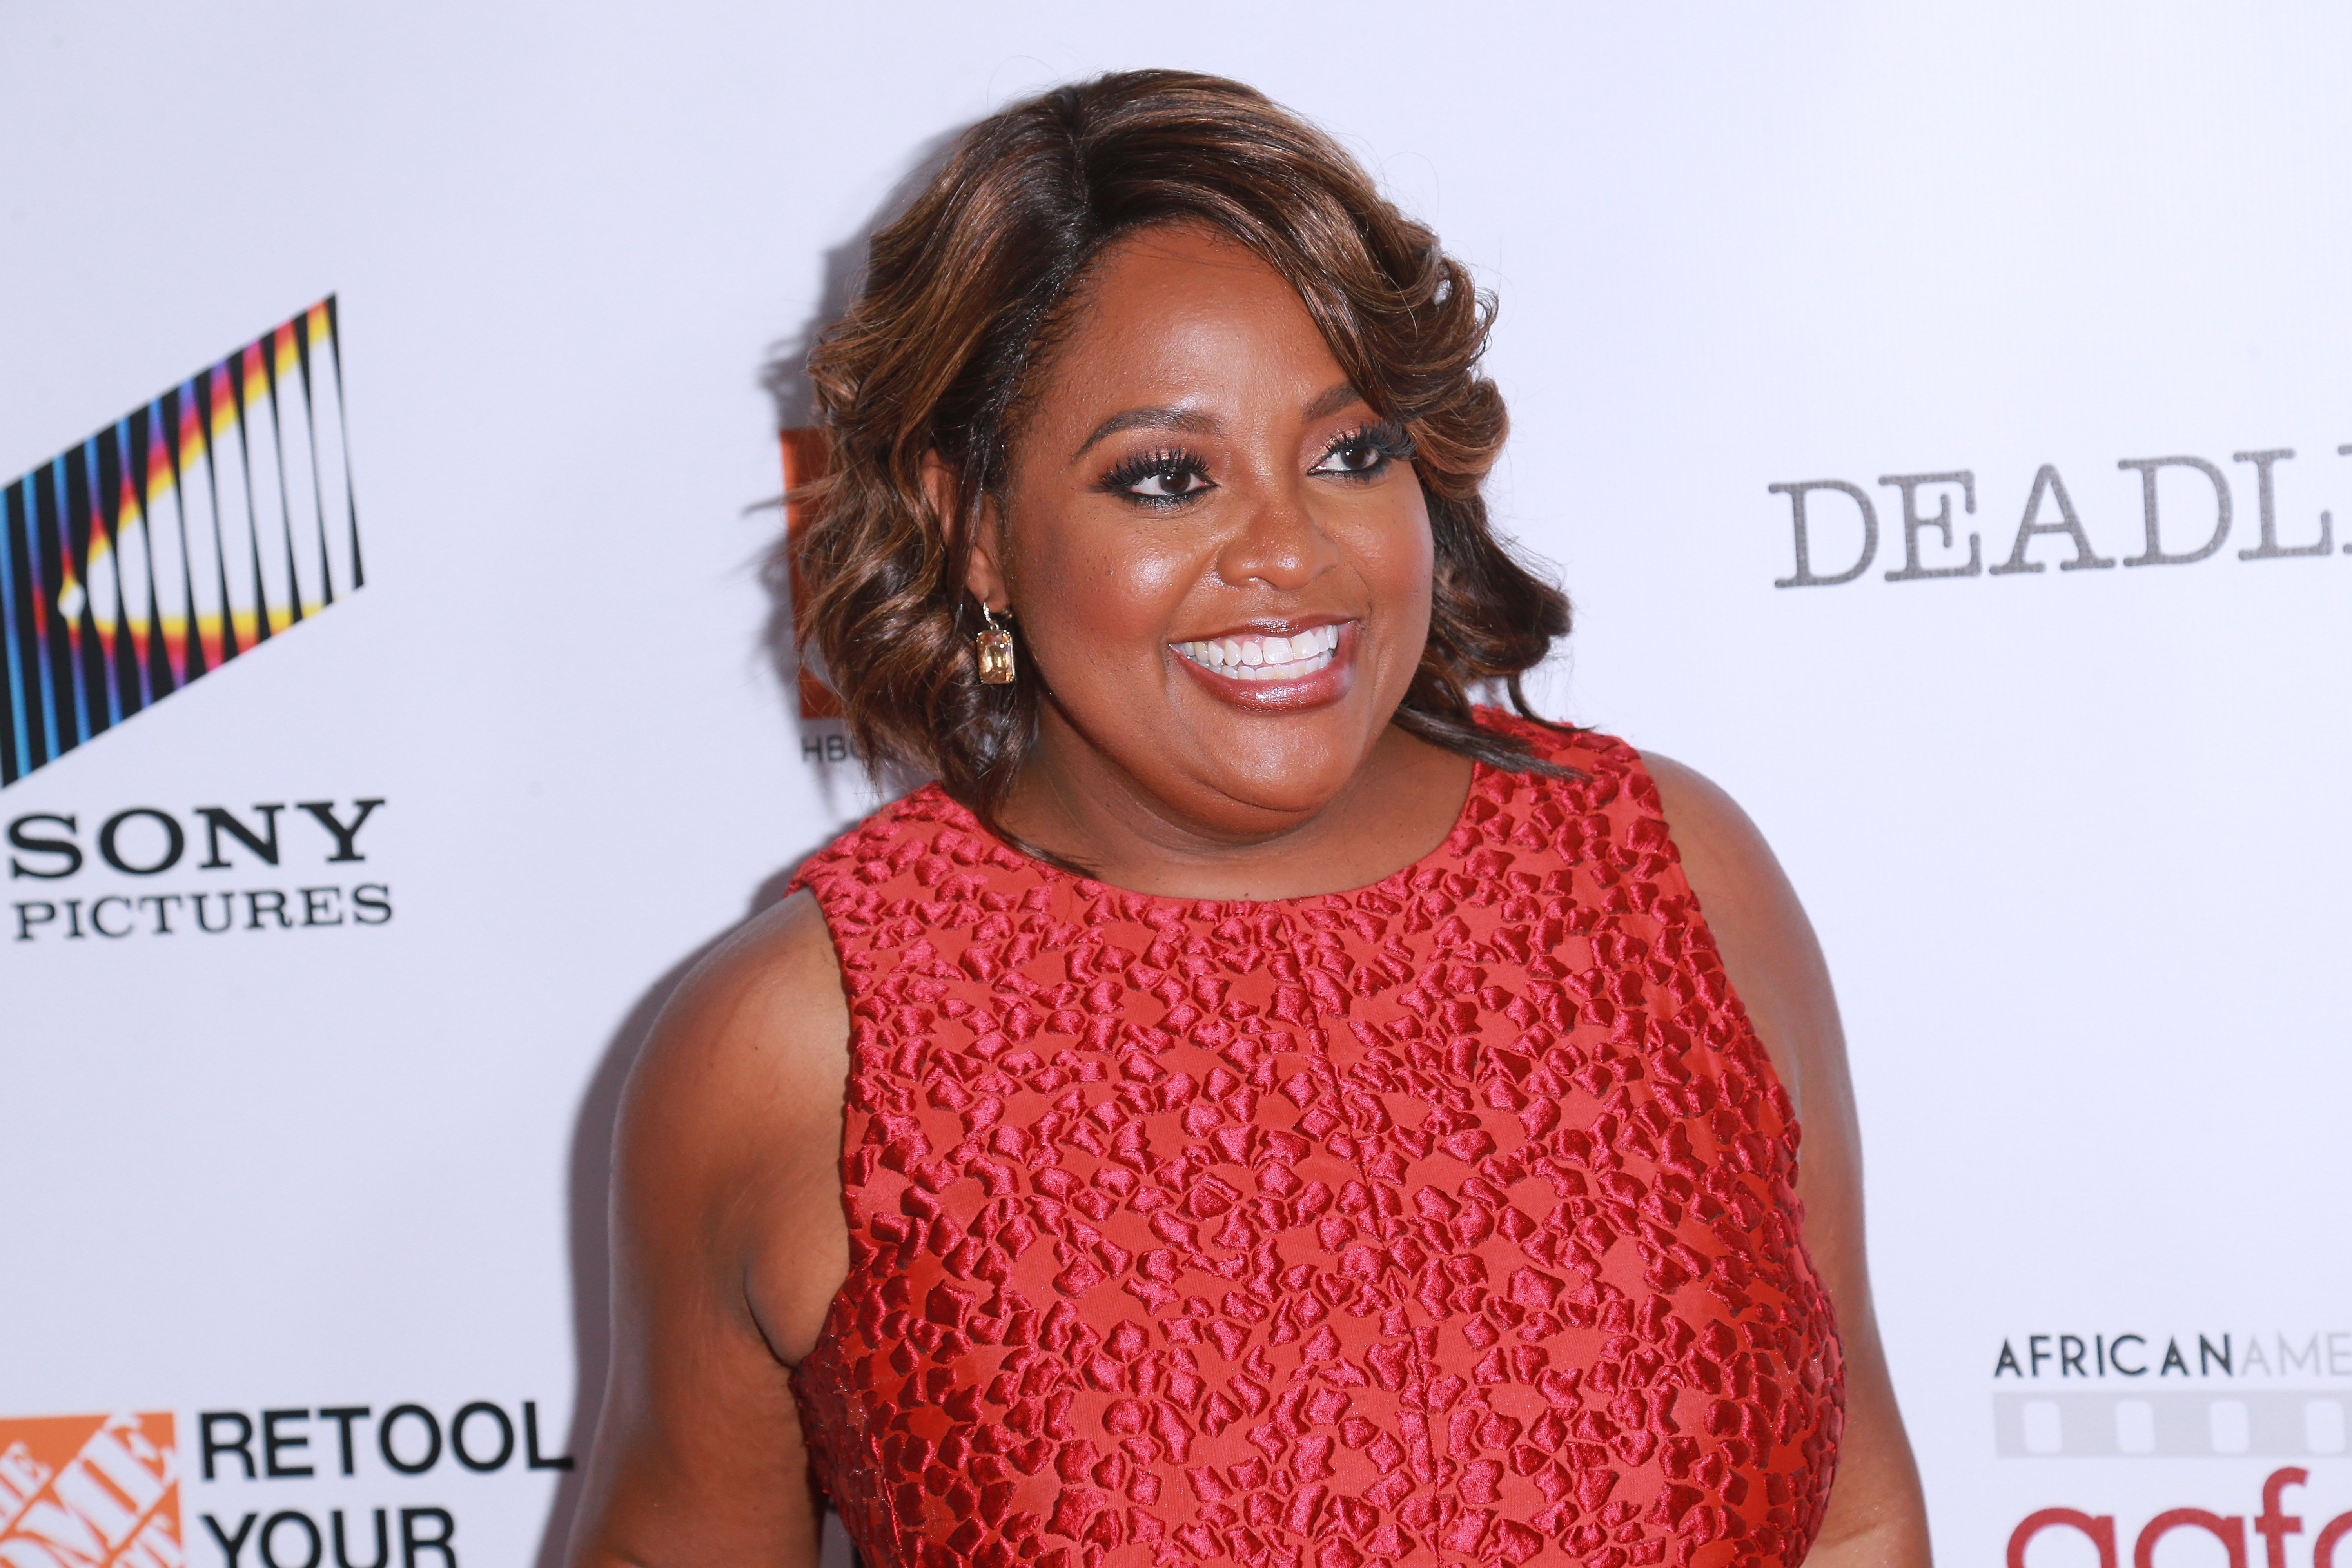 Sherri Shepherd at the 9th Annual AAFCA Awards in February 2018. | Photo: Getty Images